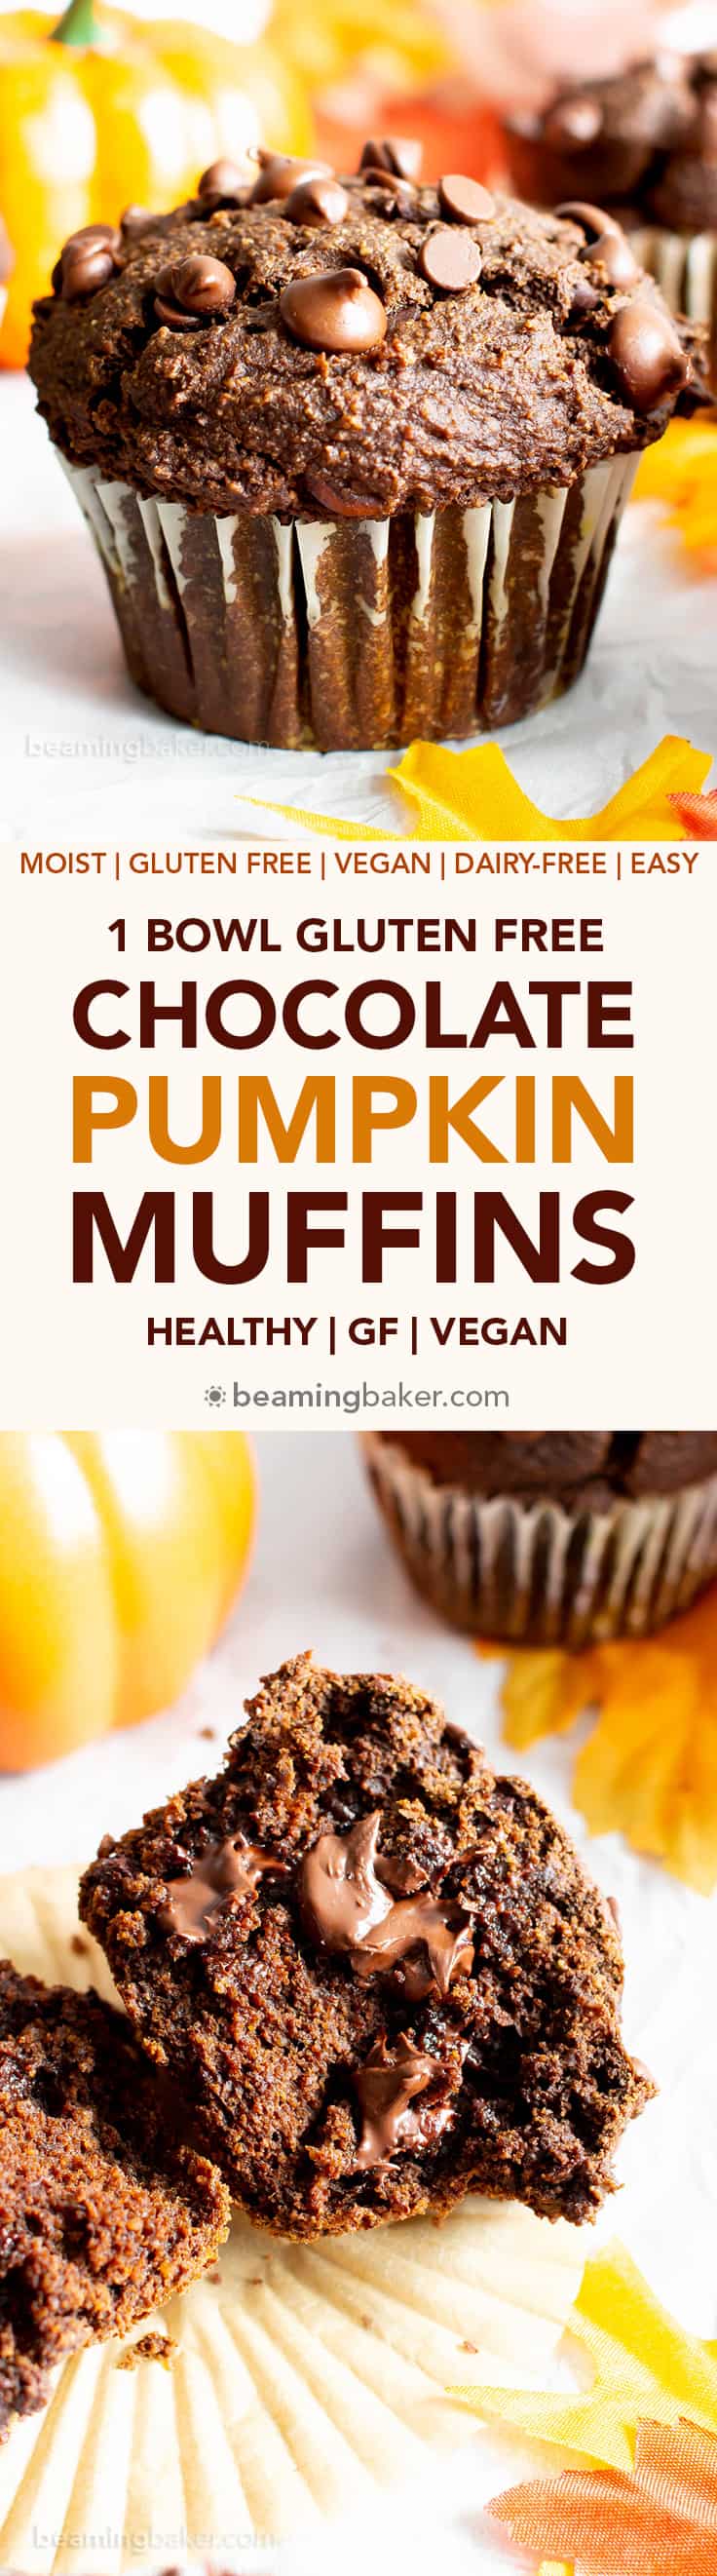 Moist Easy Gluten Free Chocolate Pumpkin Muffins (V, GF): a one bowl recipe for moist, fudgy chocolate pumpkin muffins packed with rich fall flavors! Made with healthy, whole ingredients. #Vegan #GlutenFree #Muffins #Pumpkin #Fall #Chocolate #CleanEating | Recipe at BeamingBaker.com